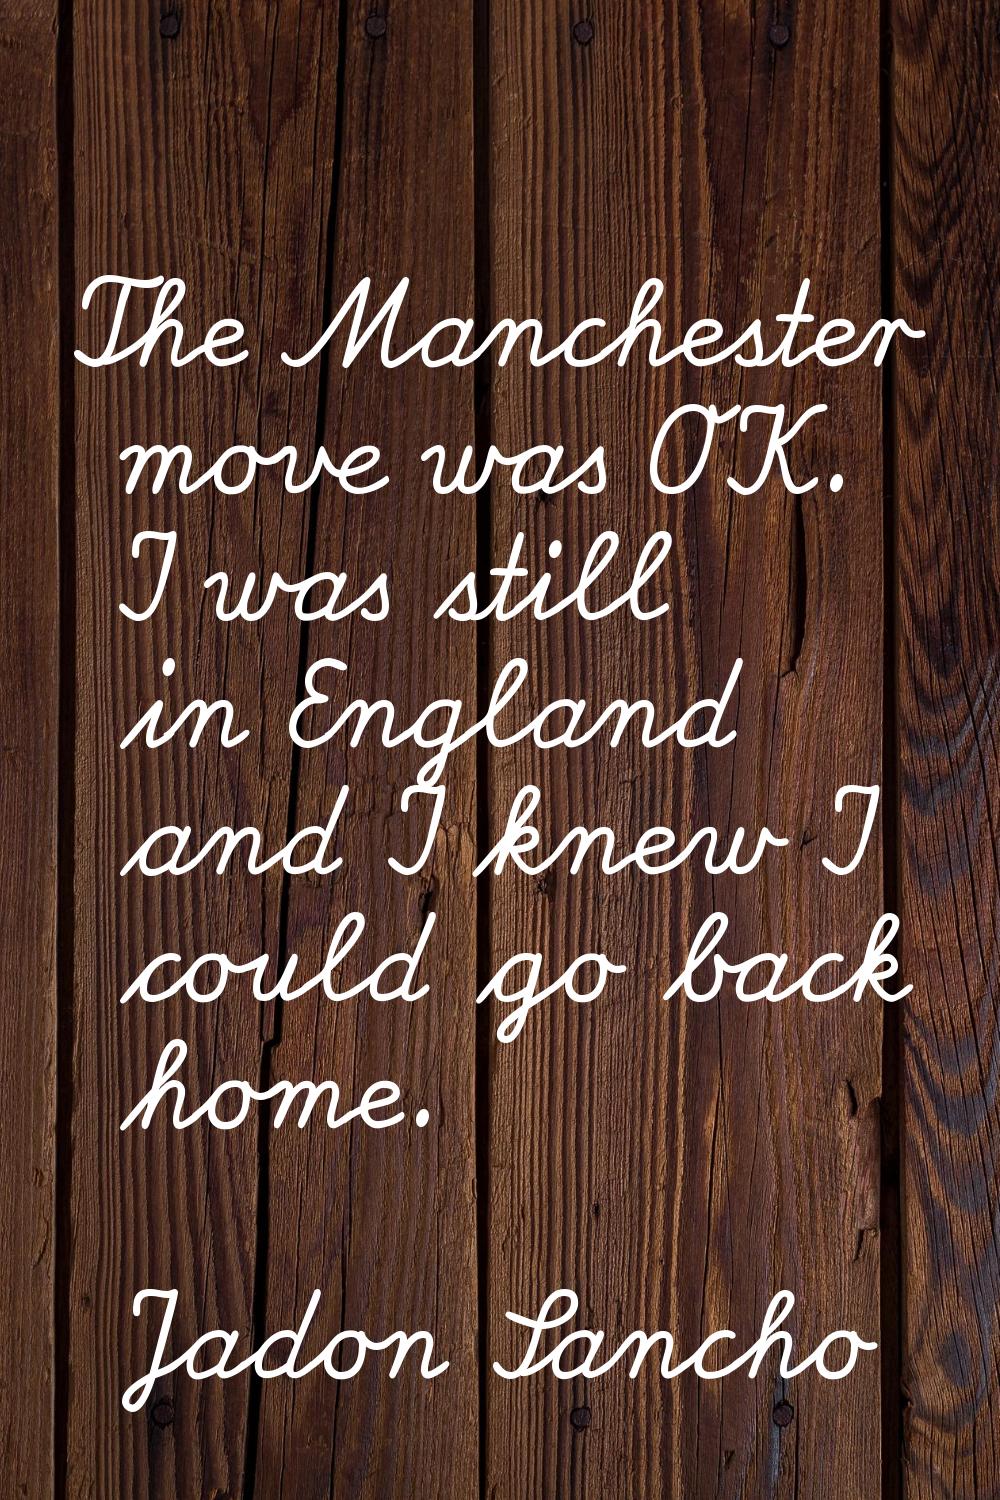 The Manchester move was OK. I was still in England and I knew I could go back home.